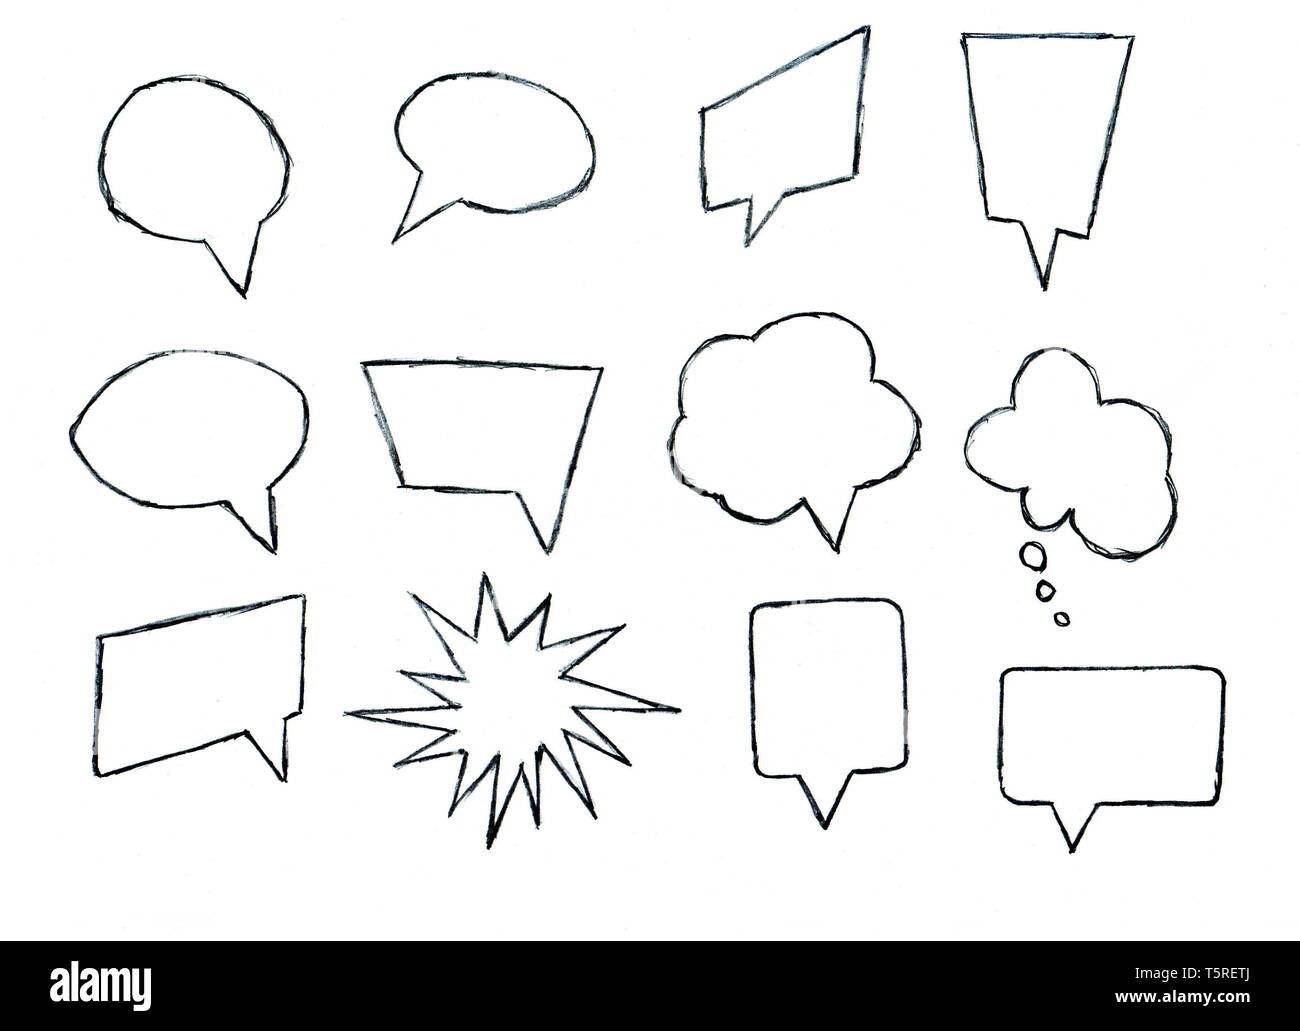 Set Of Pencil Drawn Speech Bubbles For Design And Decoration Of Chat Dialogues Animation Or Comics Flat Design Stock Photo Alamy